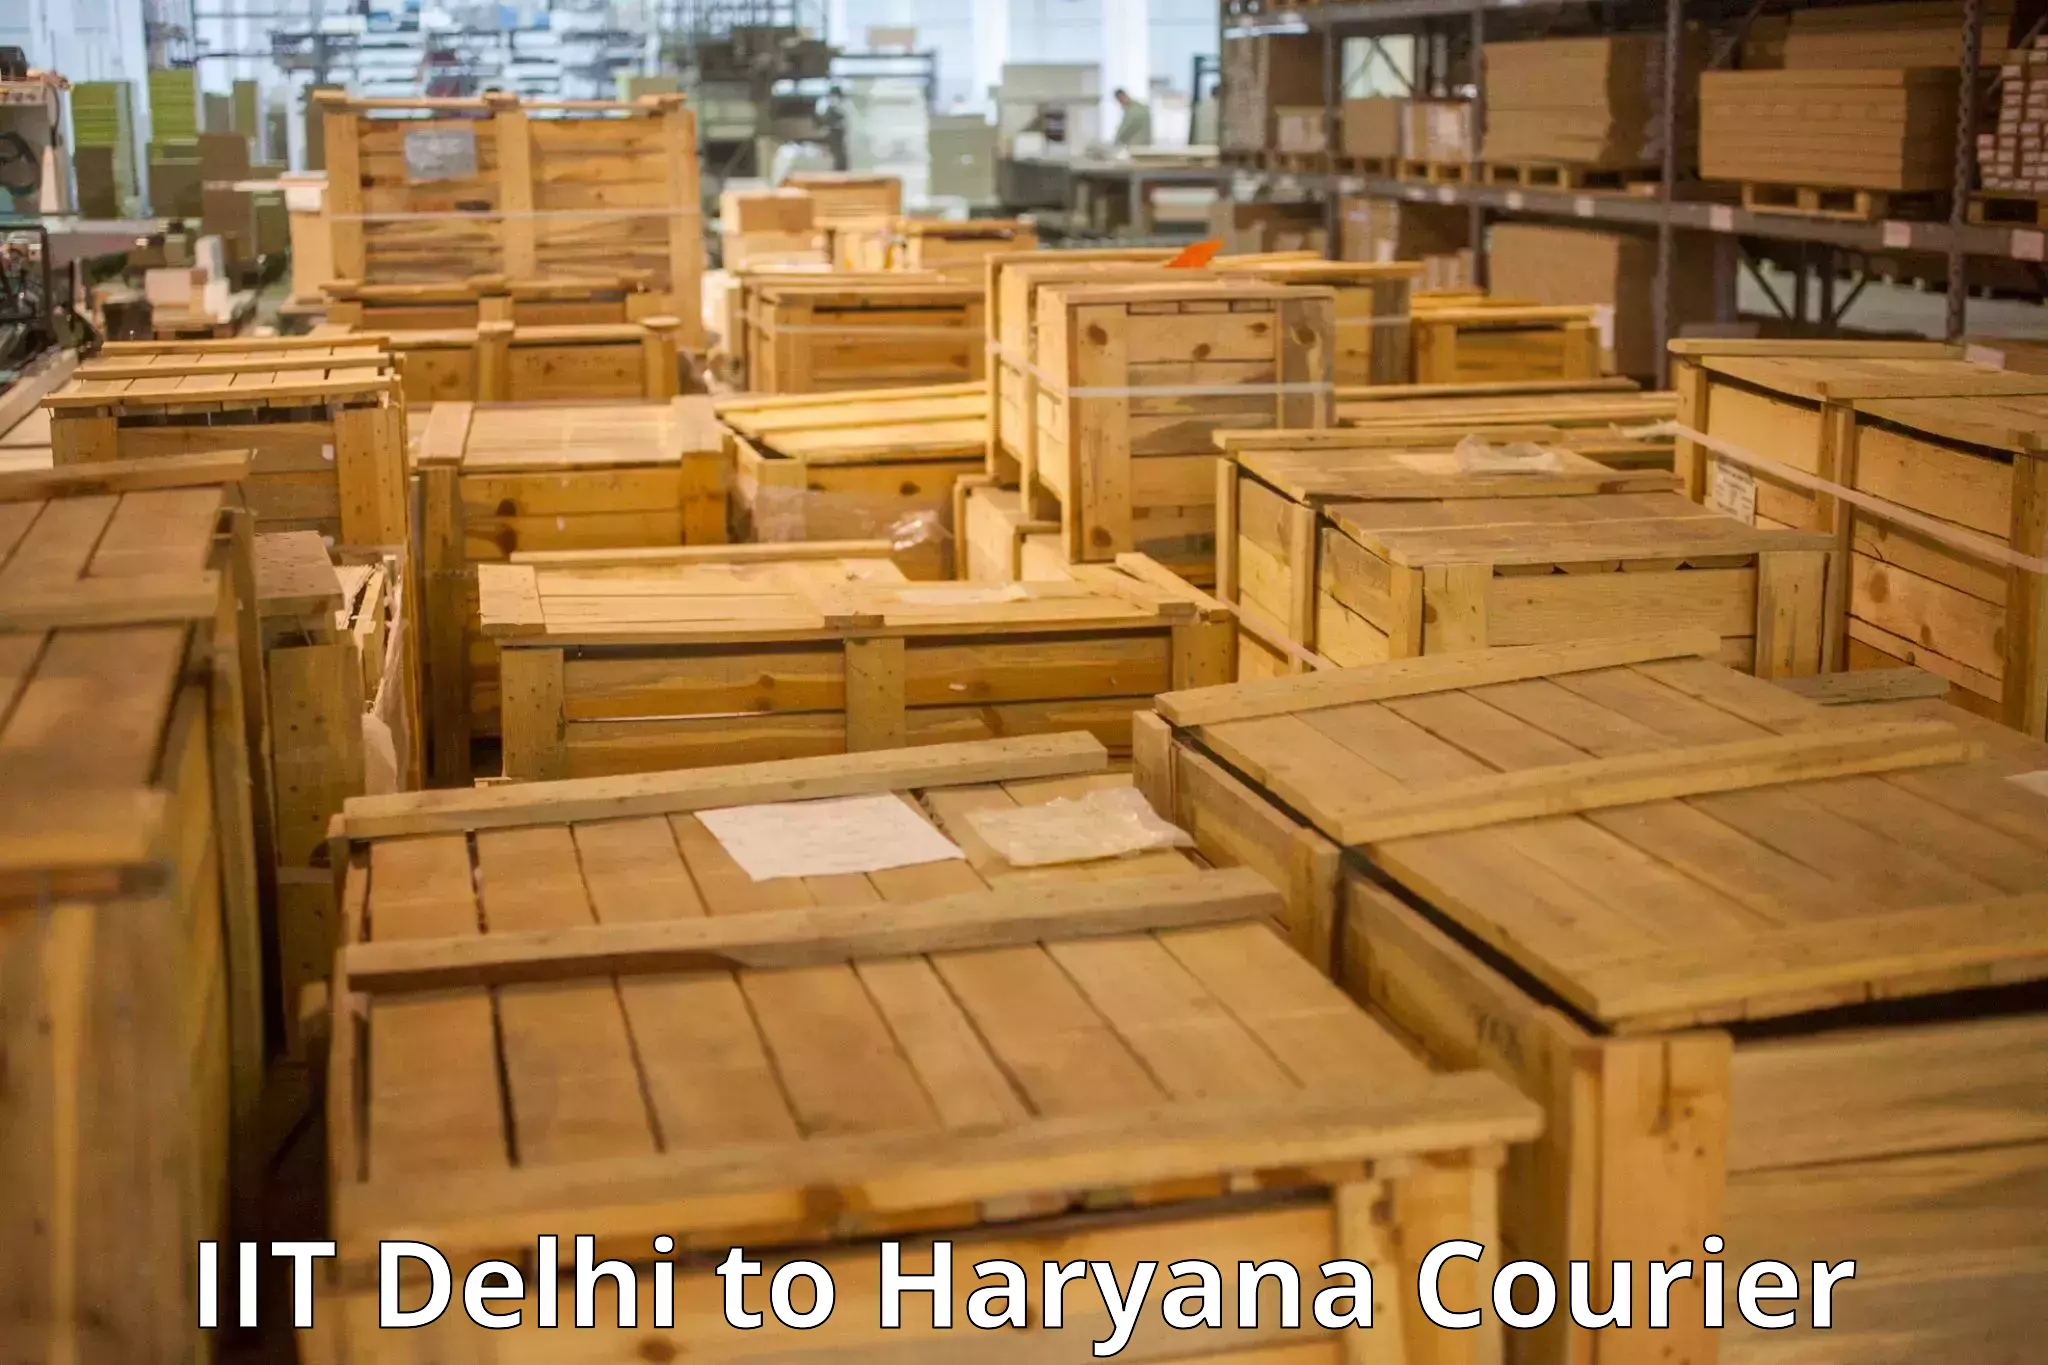 Luggage delivery network IIT Delhi to NCR Haryana